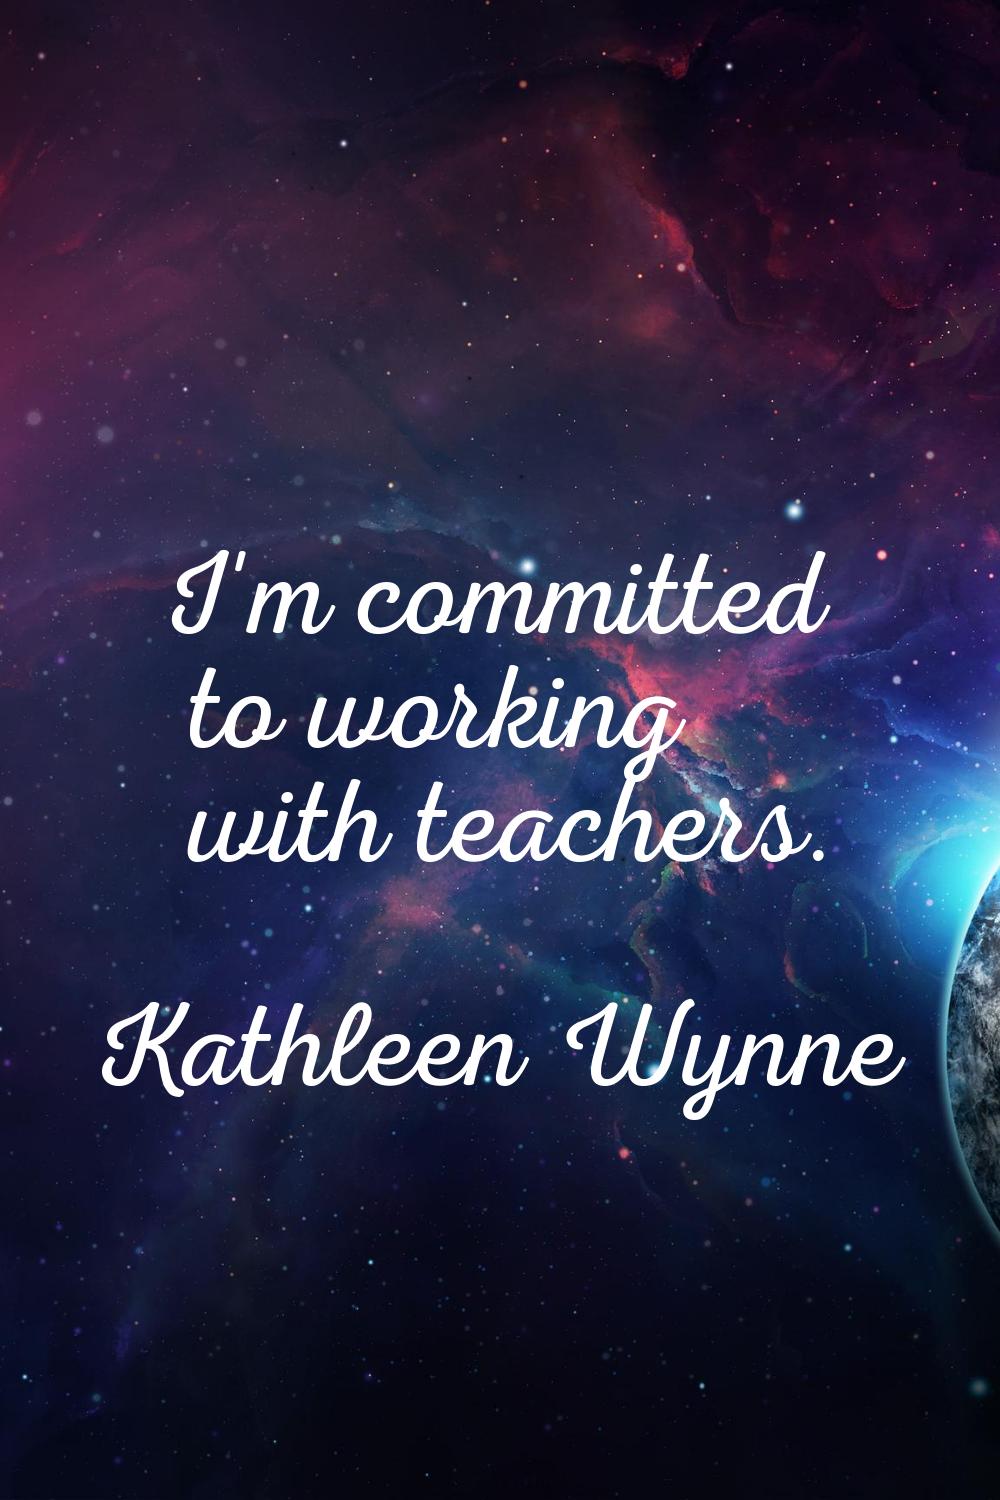 I'm committed to working with teachers.